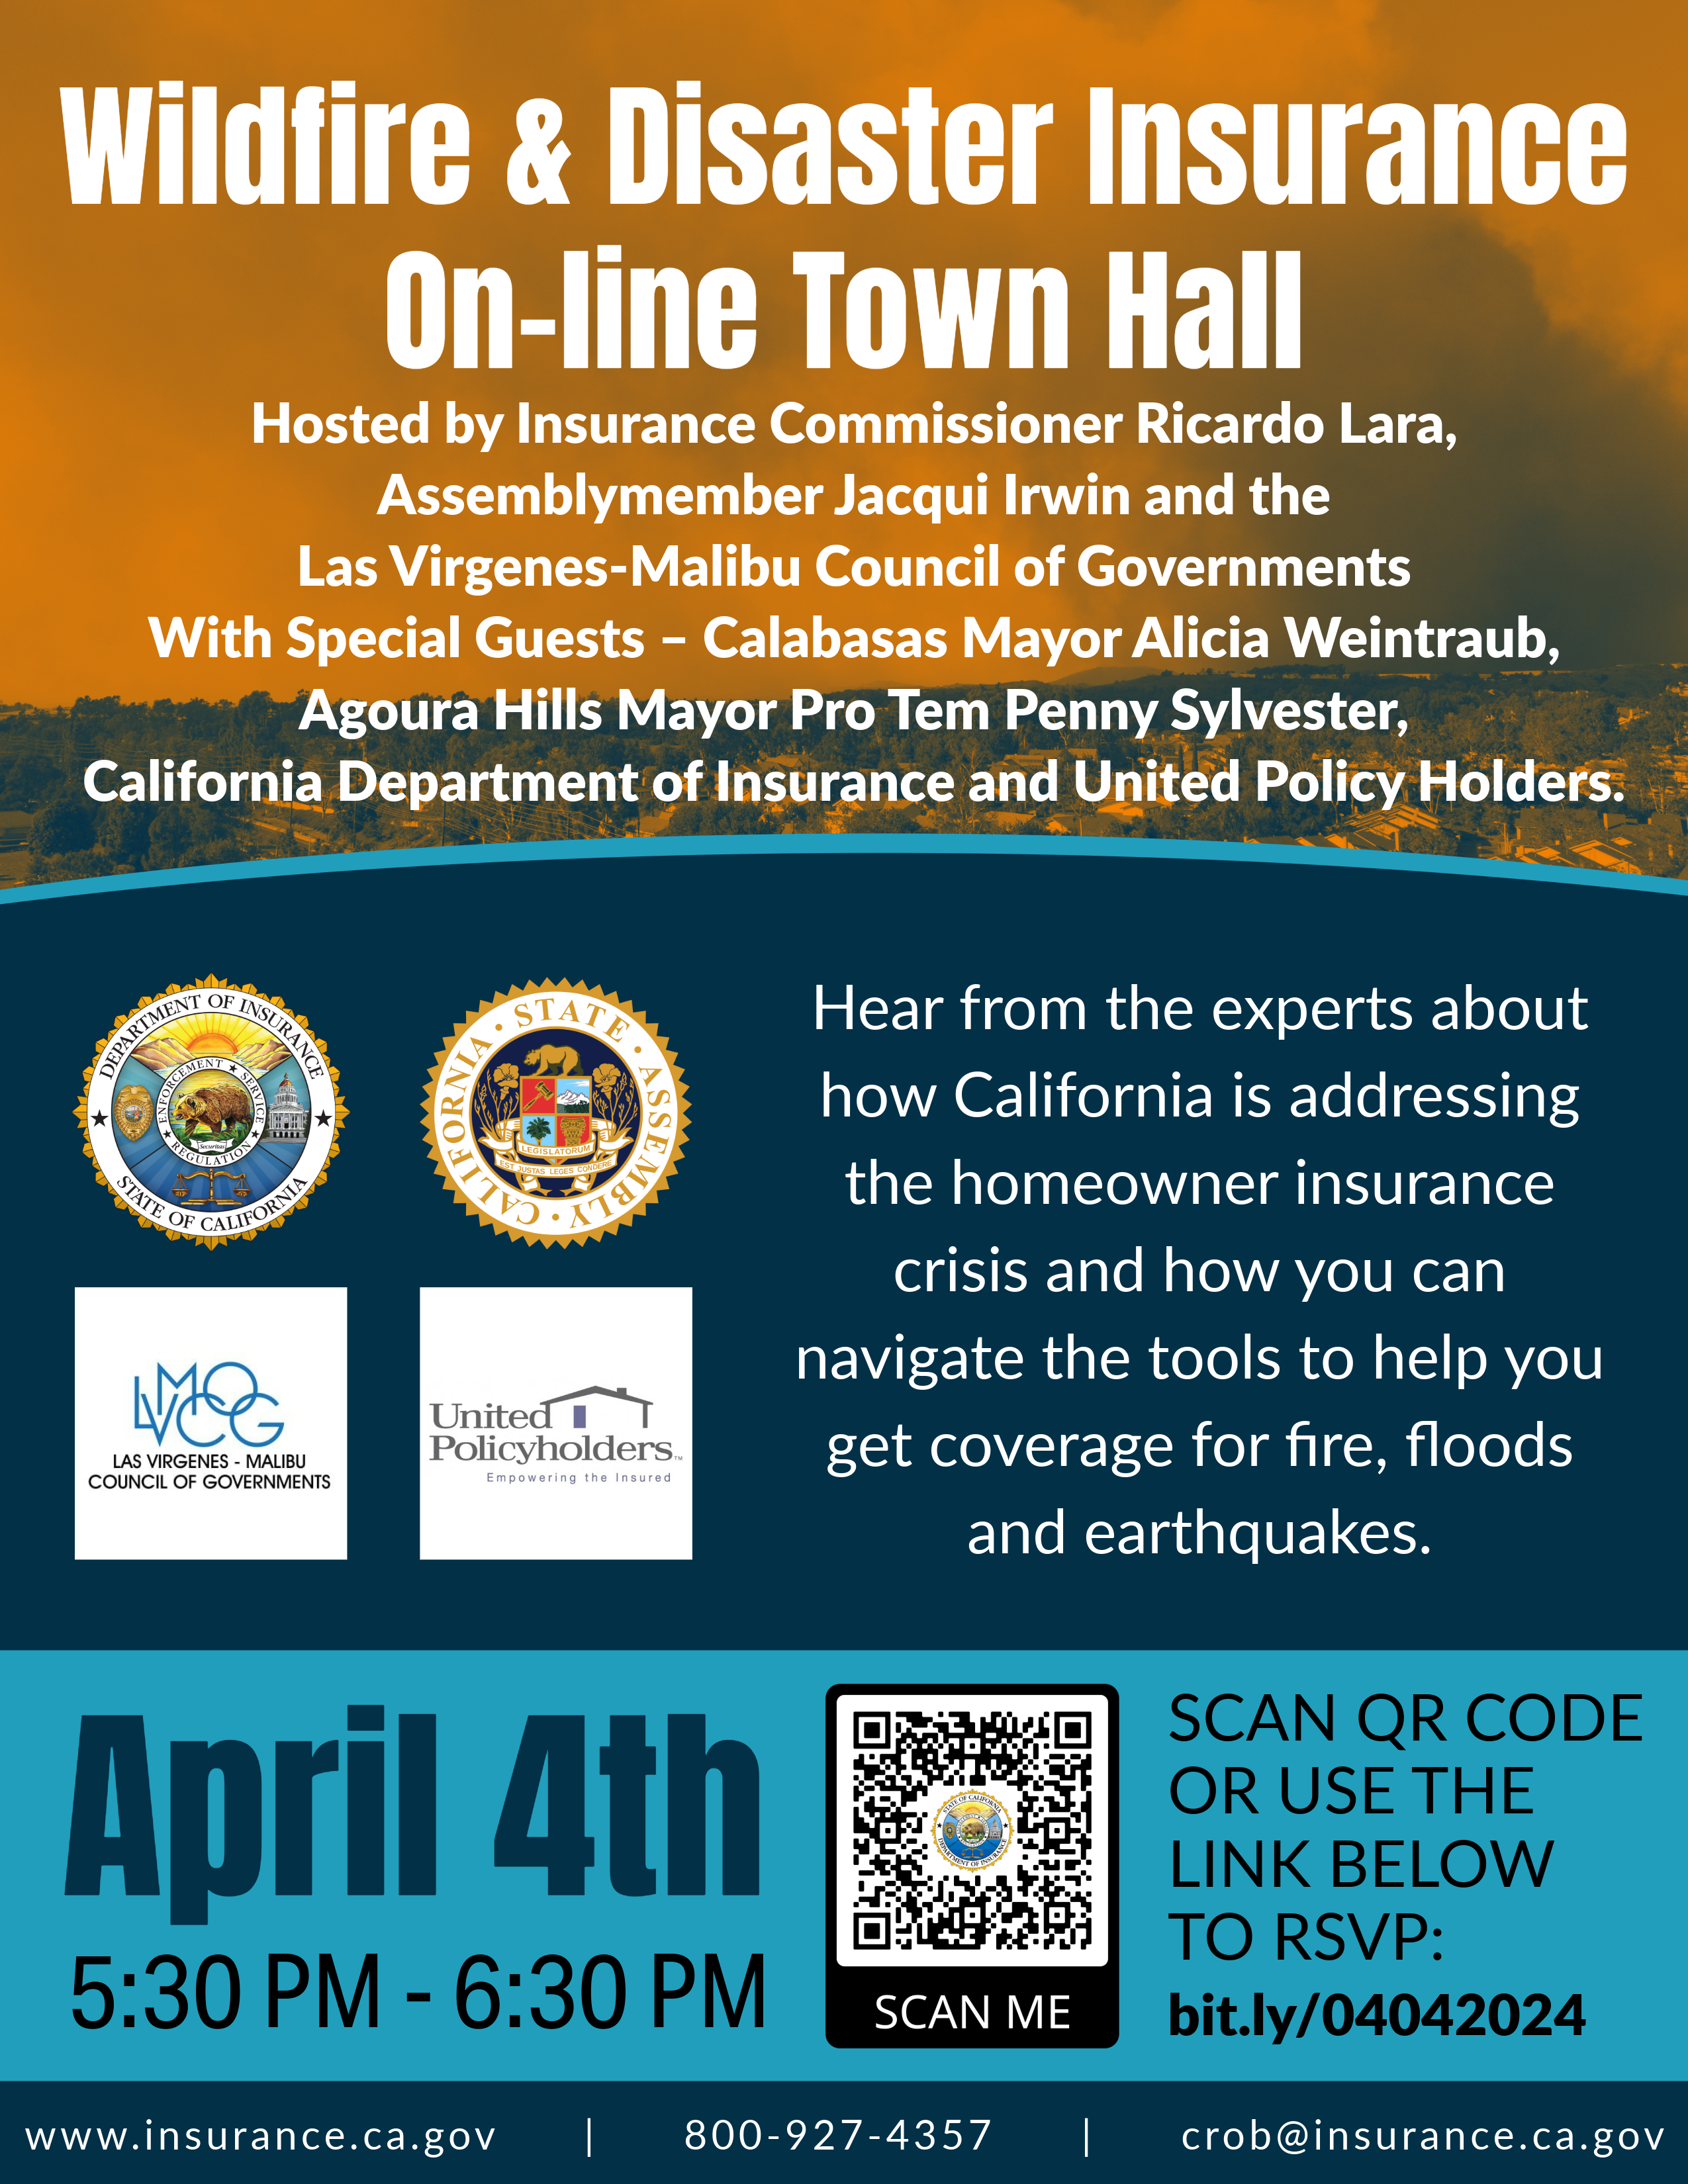 Hear from the experts about
how California is addressing
the homeowner insurance
crisis and how you can
navigate the tools to help you
get coverage for fire, floods
and earthquakes.